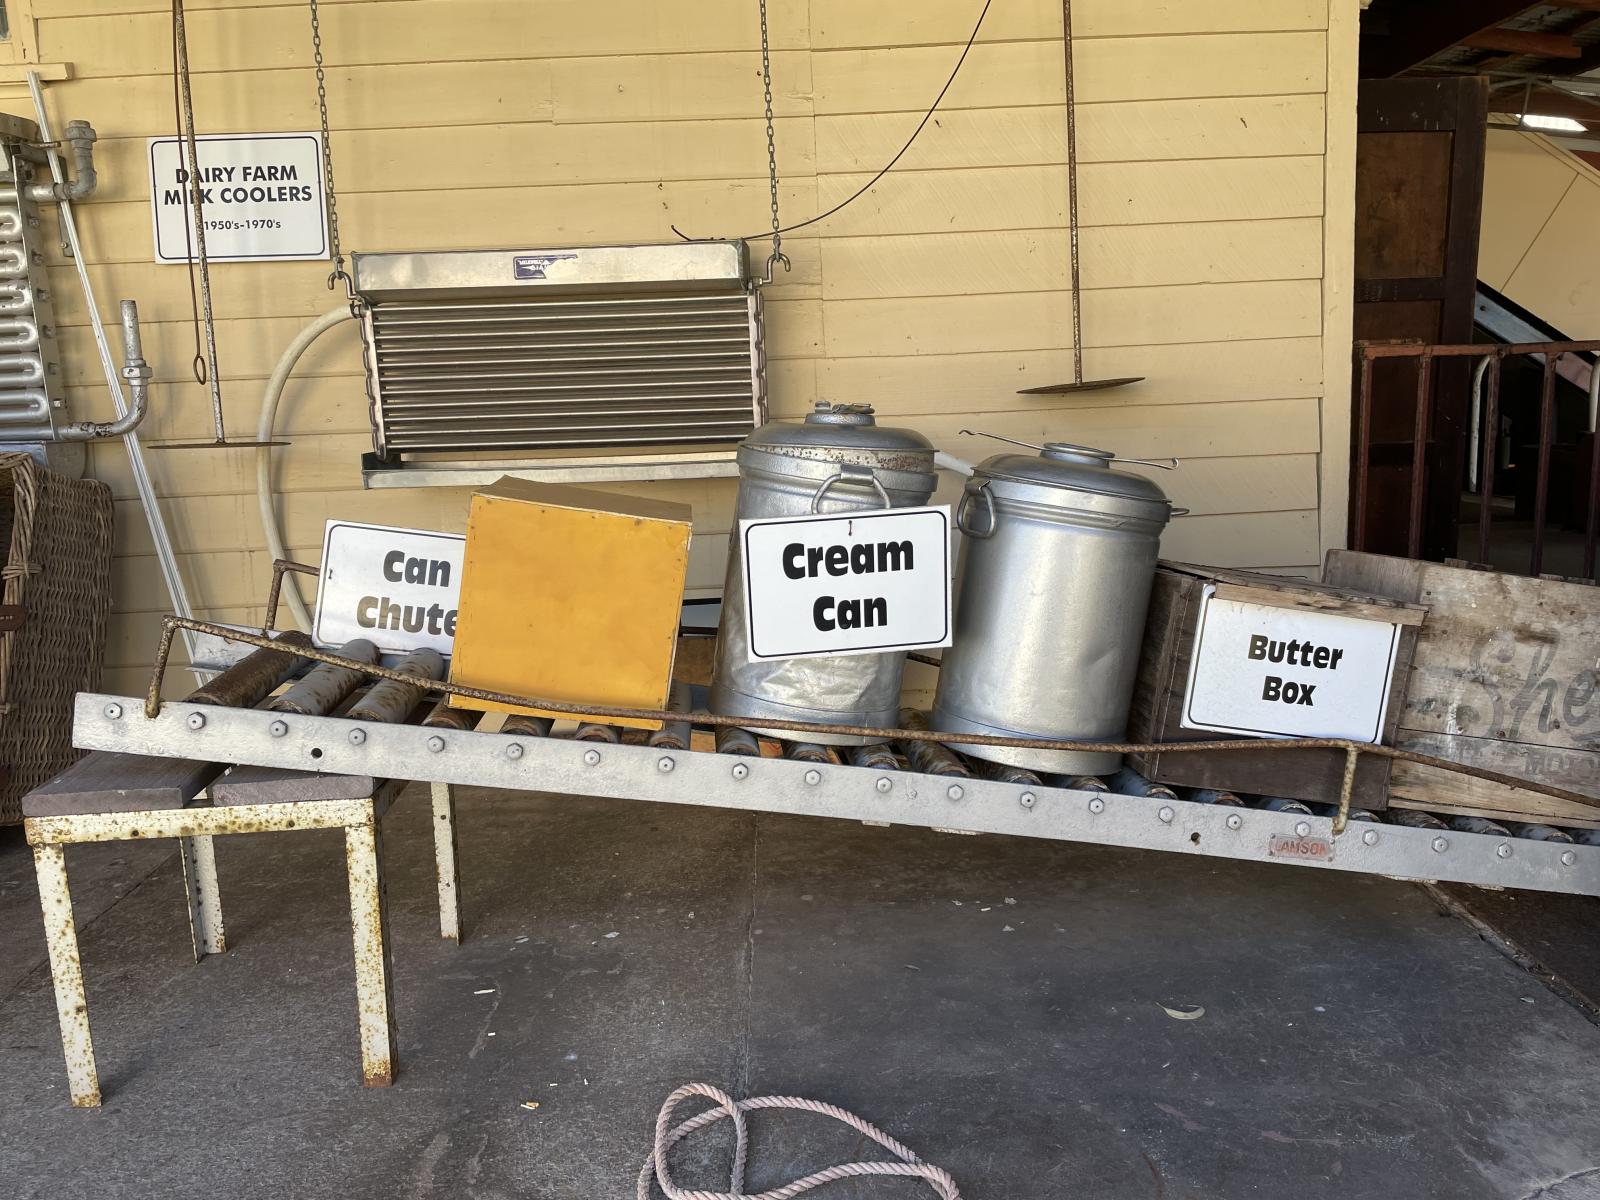 Cream cans on the conveyor feed to the Cream Can Sterilizer